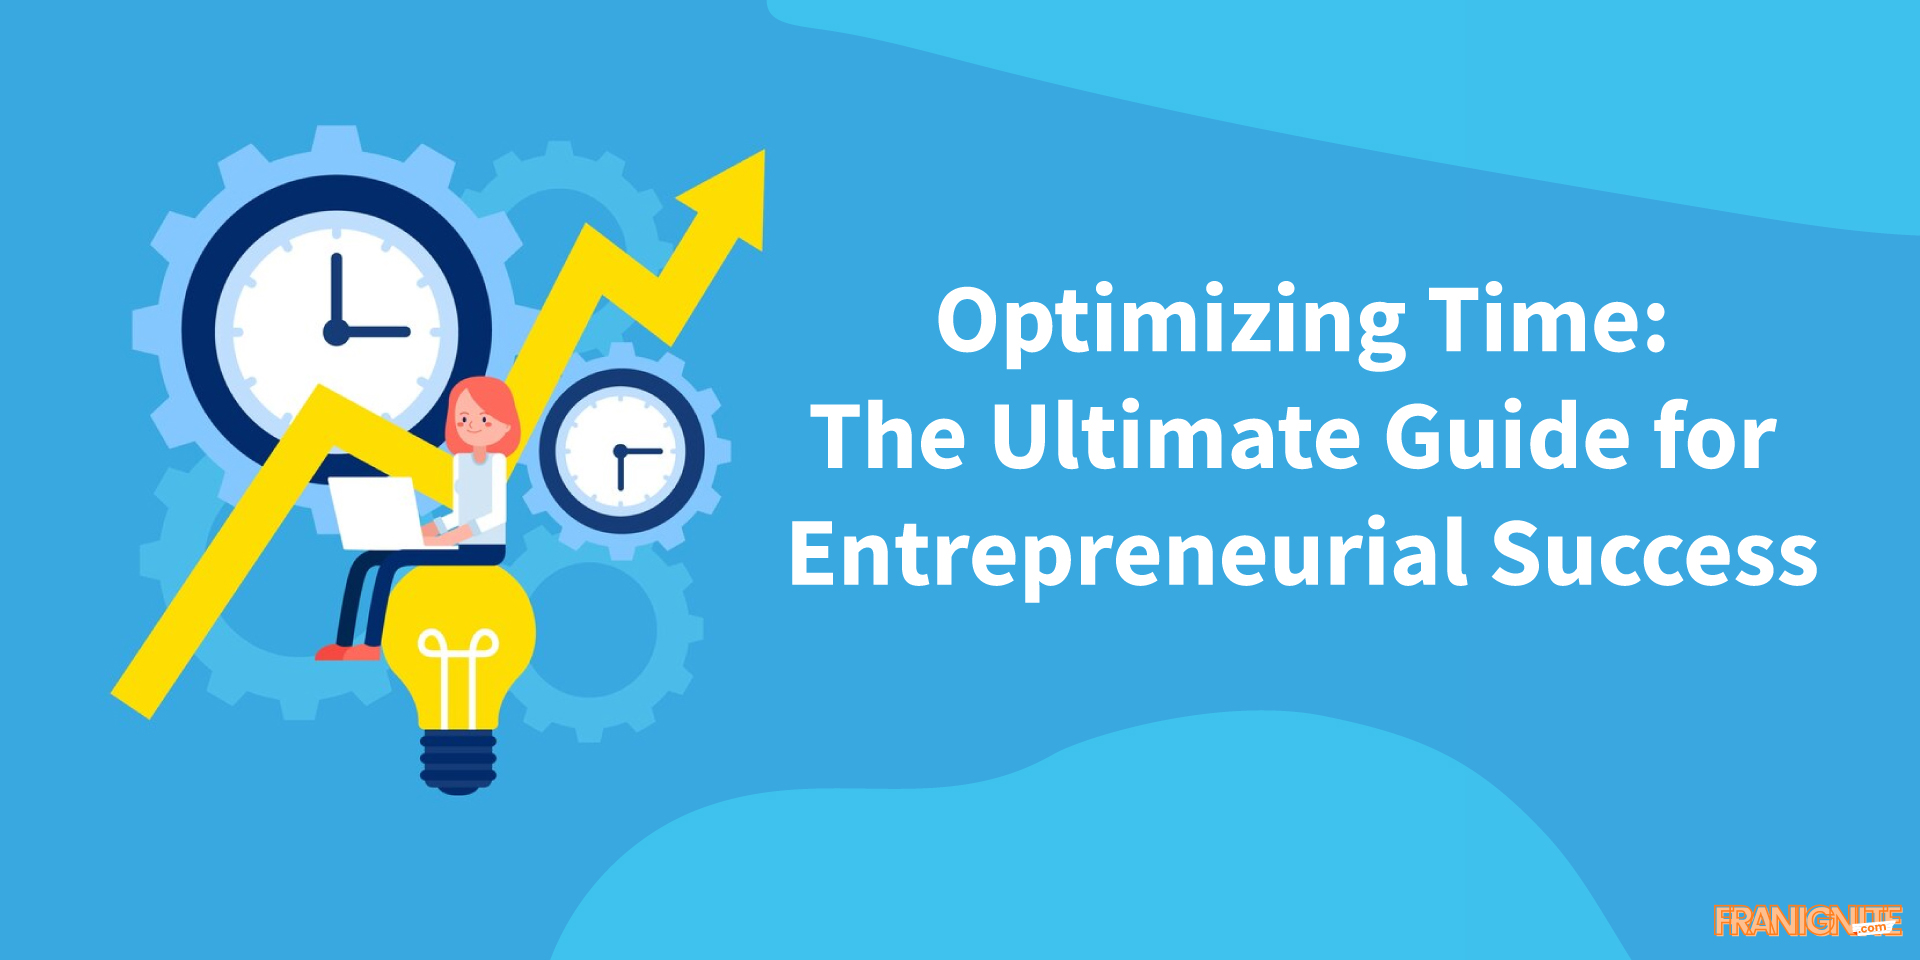 Optimizing Time: The Ultimate Guide for Entrepreneurial Success